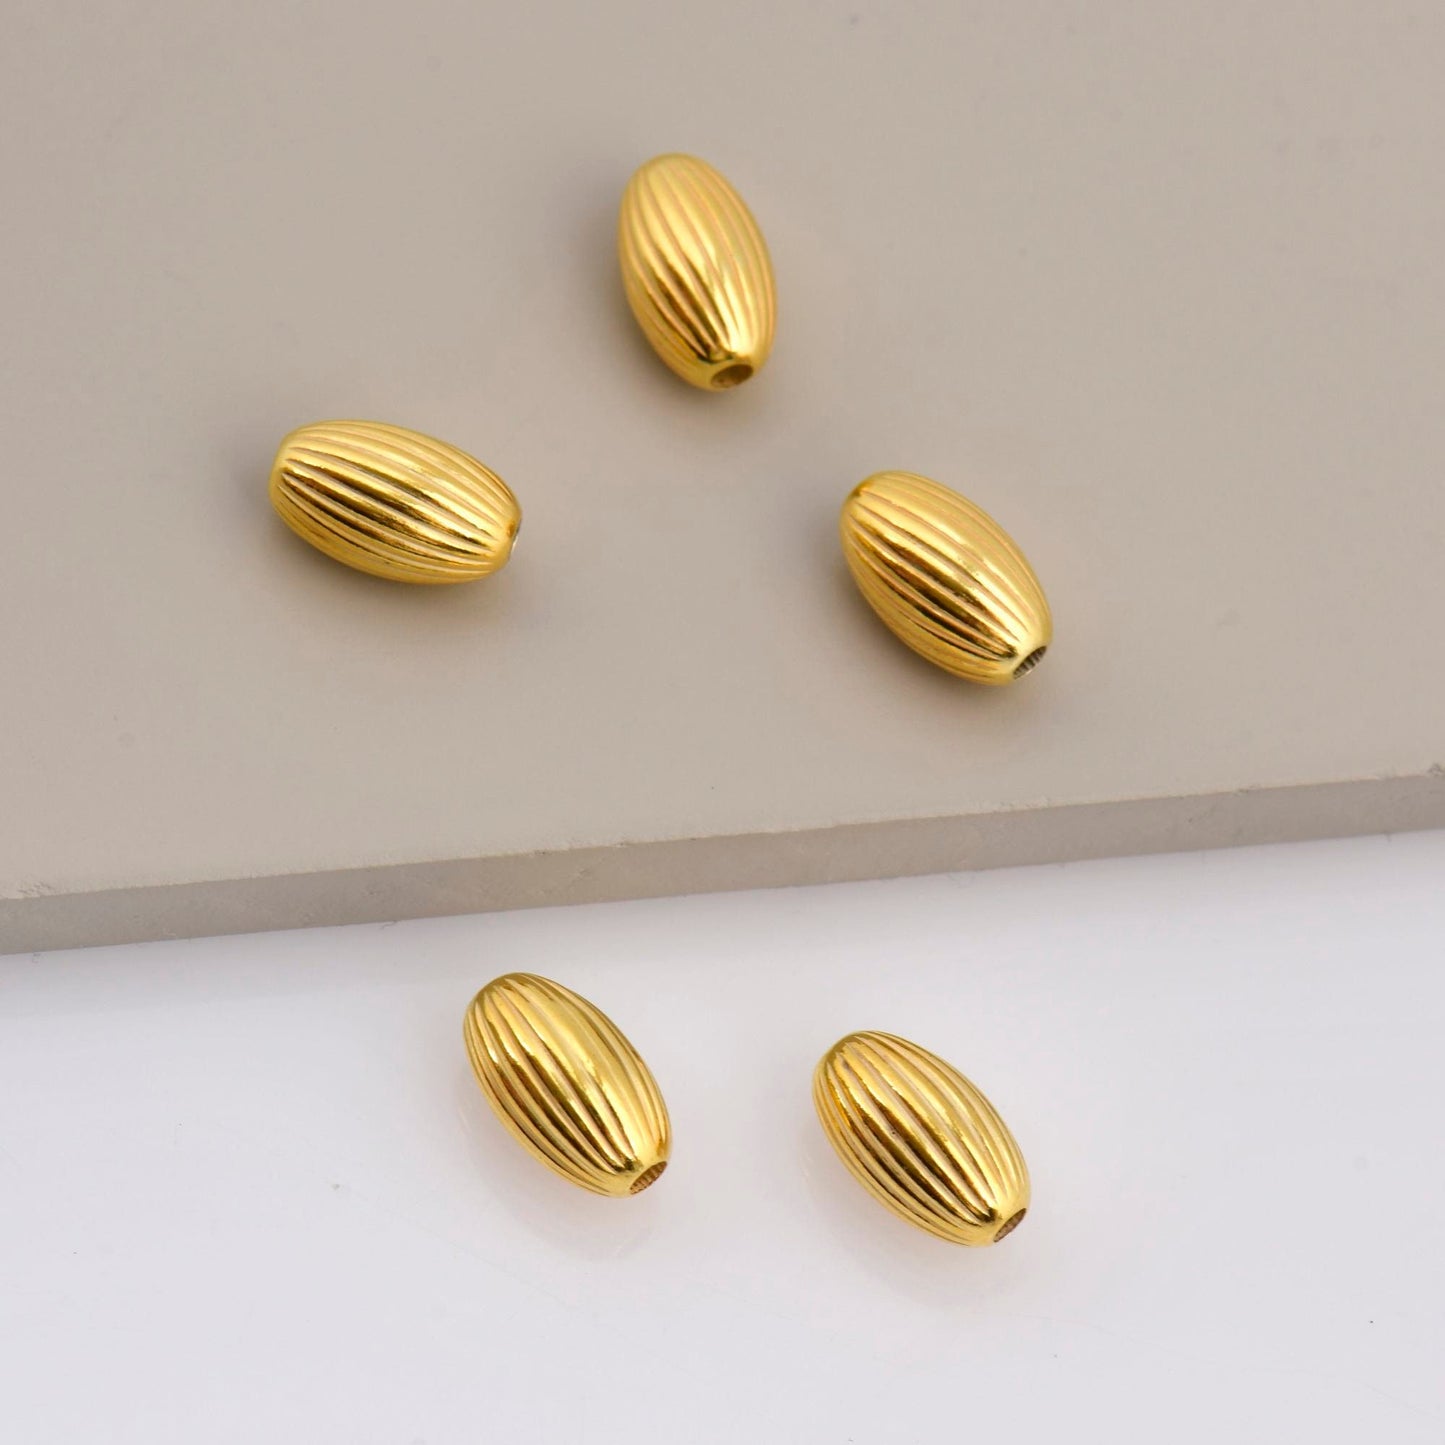 Silver Corrugated Oval Beads in 24K Gold Vermeil, 24K Gold Plated Seamless Oval Beads, Olive Shape Beads, Jewelry Supplies, M/VM4 A-E